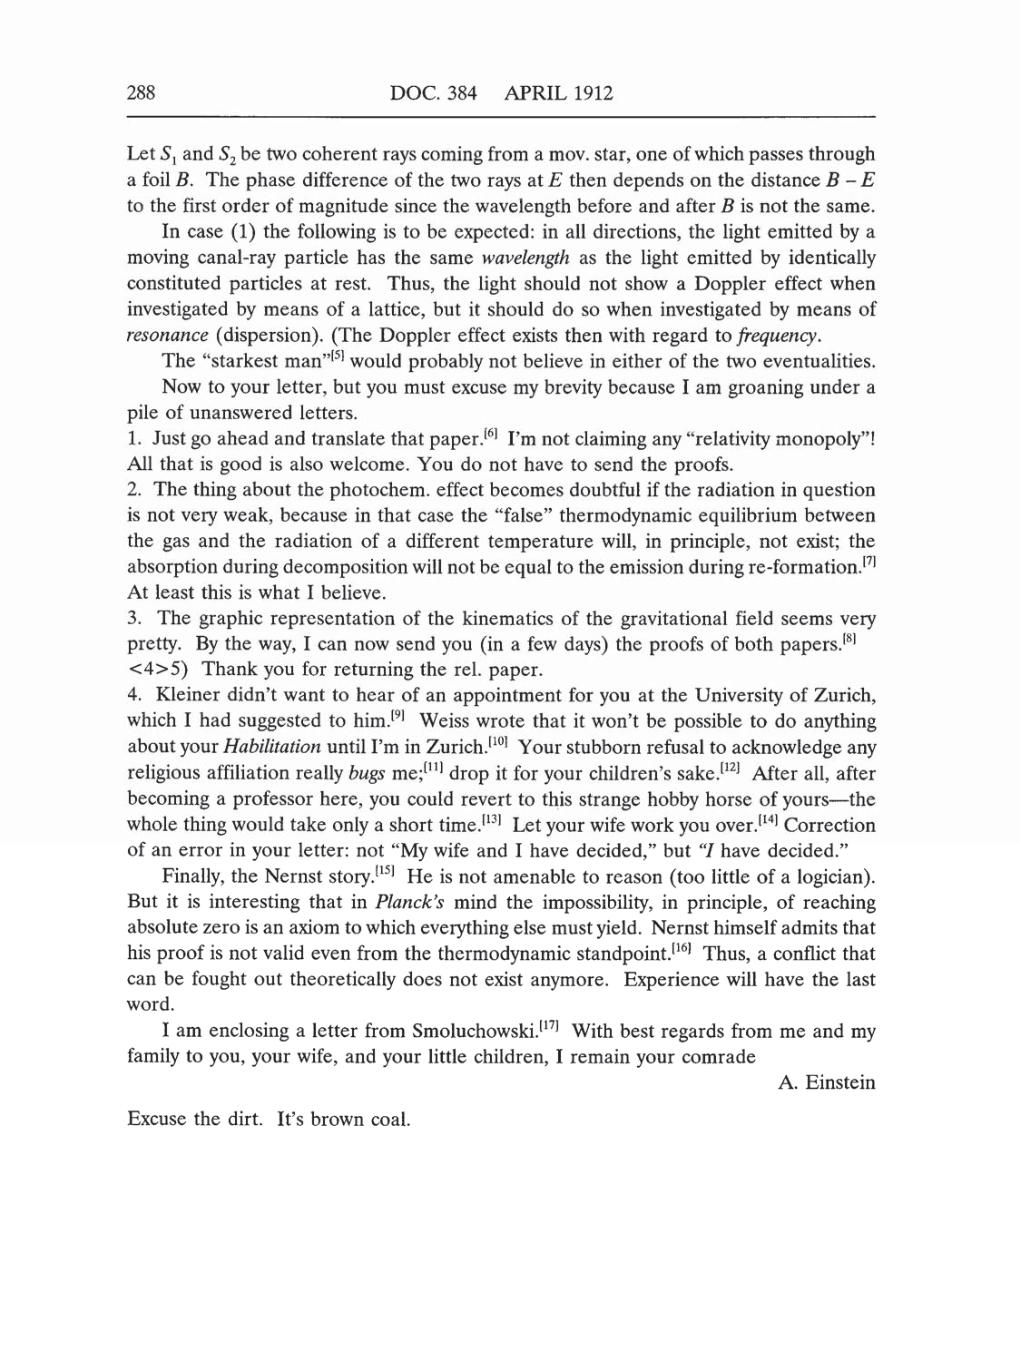 Volume 5: The Swiss Years: Correspondence, 1902-1914 (English translation supplement) page 288